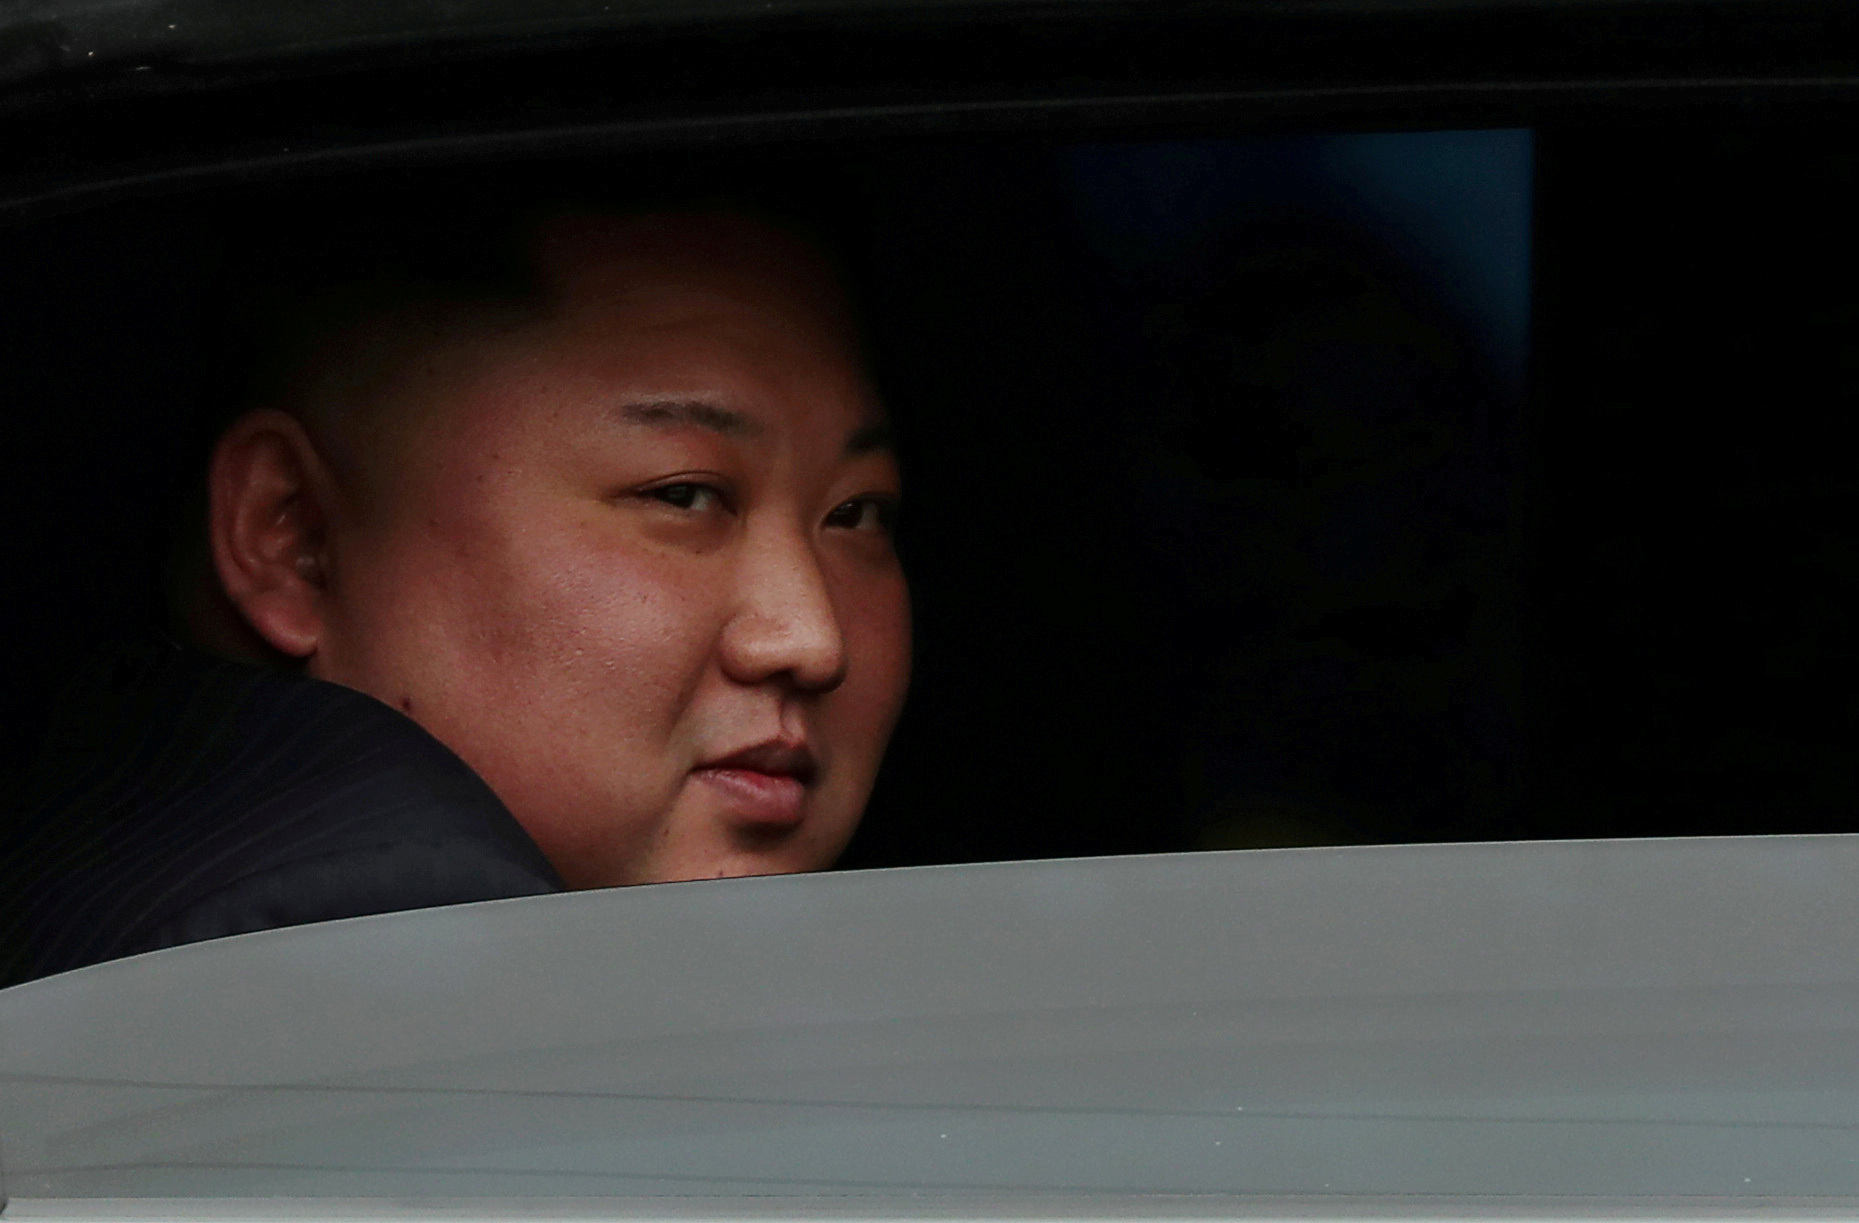 North Korea's leader Kim Jong Un sits in his vehicle after arriving at a railway station in Dong Dang, Vietnam